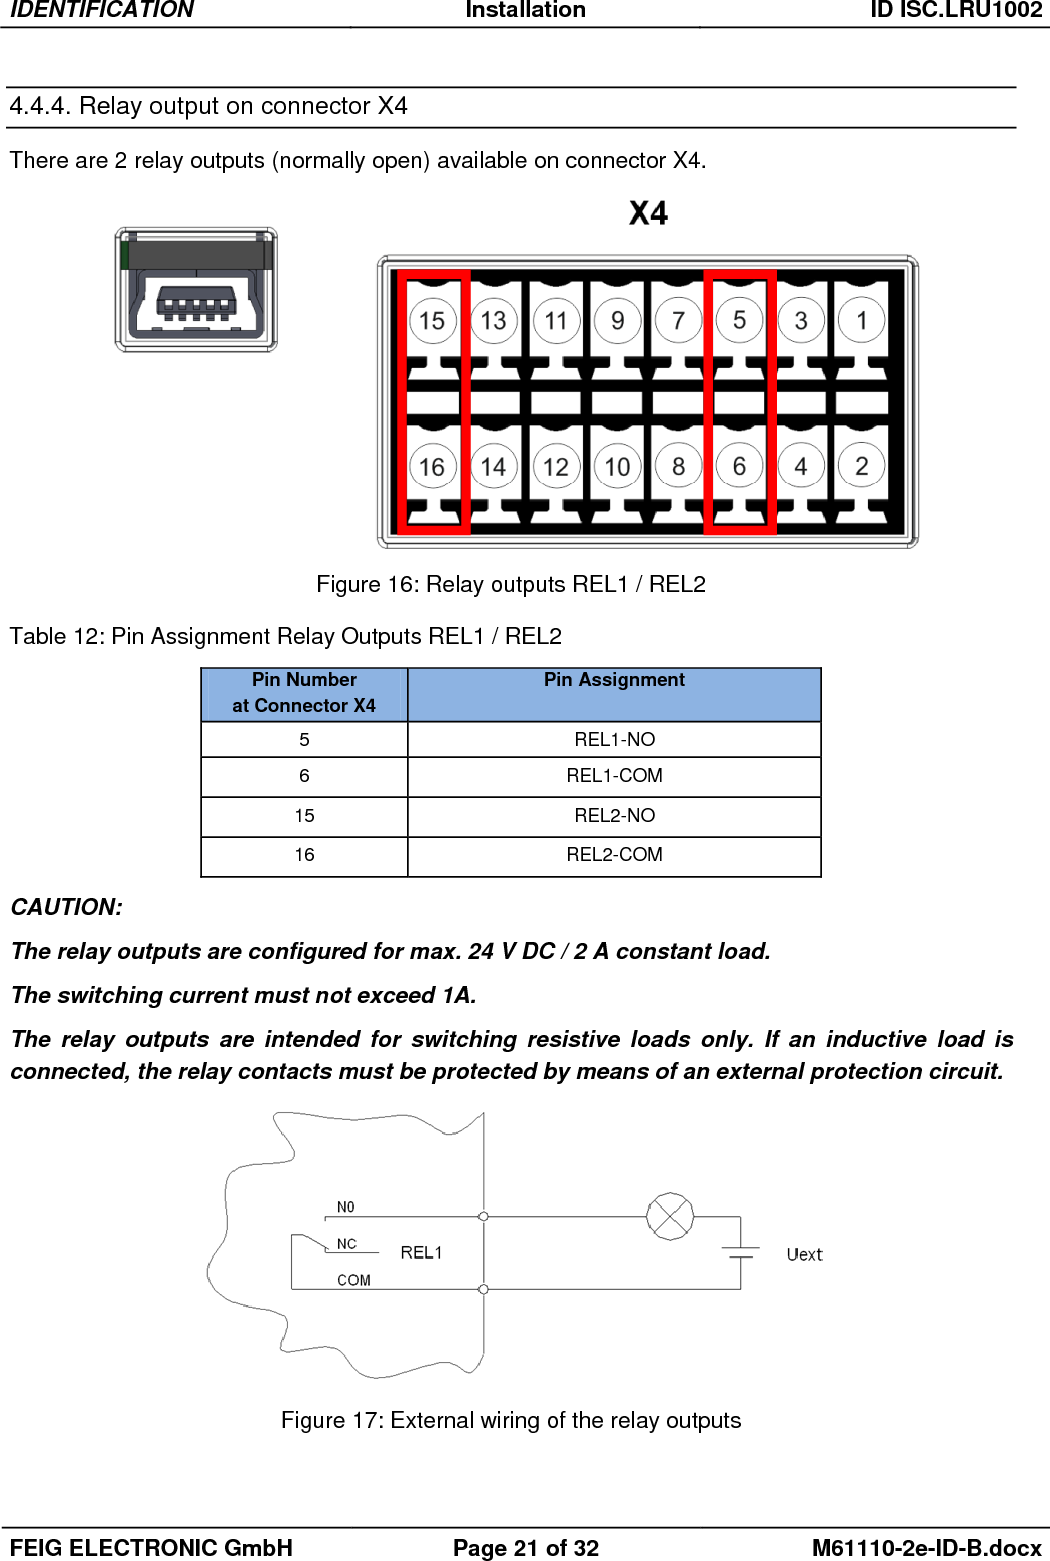 IDENTIFICATION Installation ID ISC.LRU1002  FEIG ELECTRONIC GmbH Page 21 of 32 M61110-2e-ID-B.docx  4.4.4. Relay output on connector X4 There are 2 relay outputs (normally open) available on connector X4.   Figure 16: Relay outputs REL1 / REL2  Table 12: Pin Assignment Relay Outputs REL1 / REL2   CAUTION: The relay outputs are configured for max. 24 V DC / 2 A constant load.  The switching current must not exceed 1A. The  relay  outputs  are  intended  for  switching  resistive  loads  only.  If  an  inductive  load  is connected, the relay contacts must be protected by means of an external protection circuit.  Figure 17: External wiring of the relay outputs Pin Number  at Connector X4 Pin Assignment 5 REL1-NO 6 REL1-COM 15 REL2-NO 16 REL2-COM 